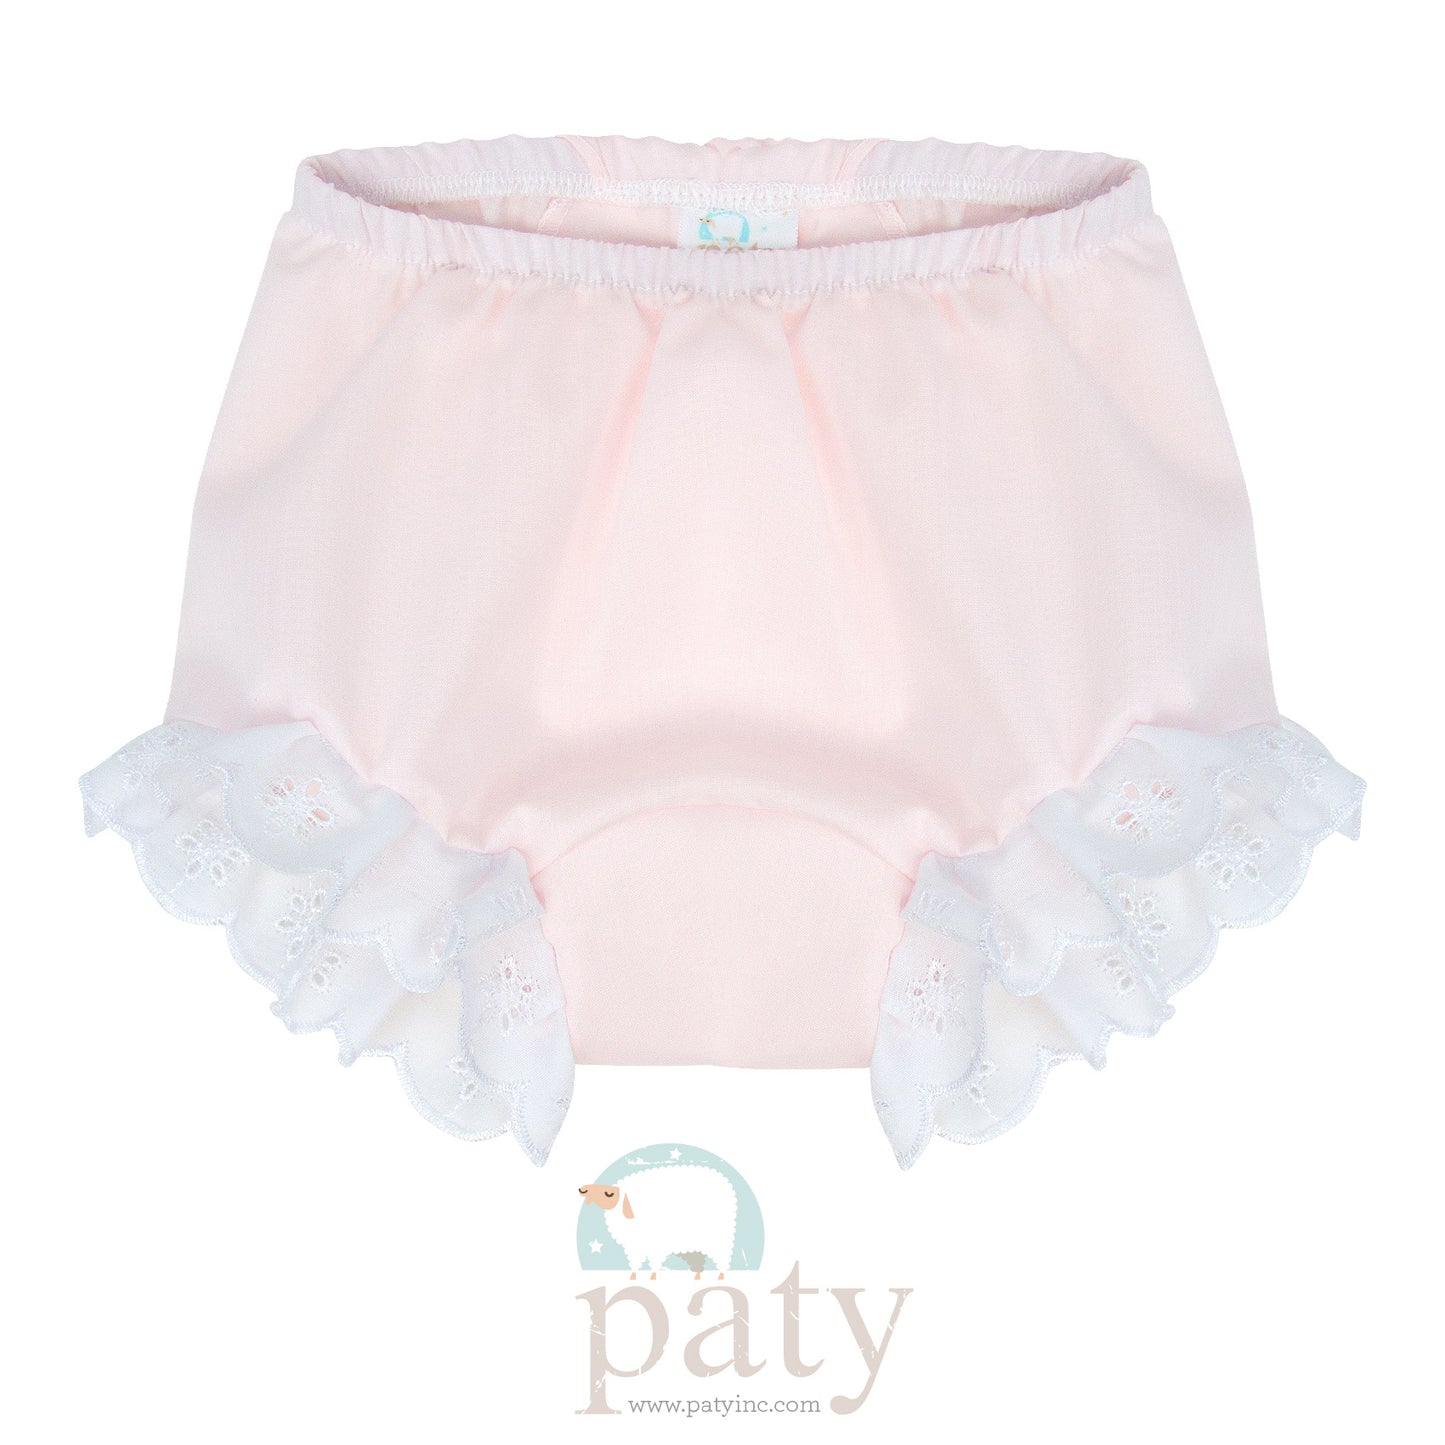 Diaper Cover with Eyelet - Pink